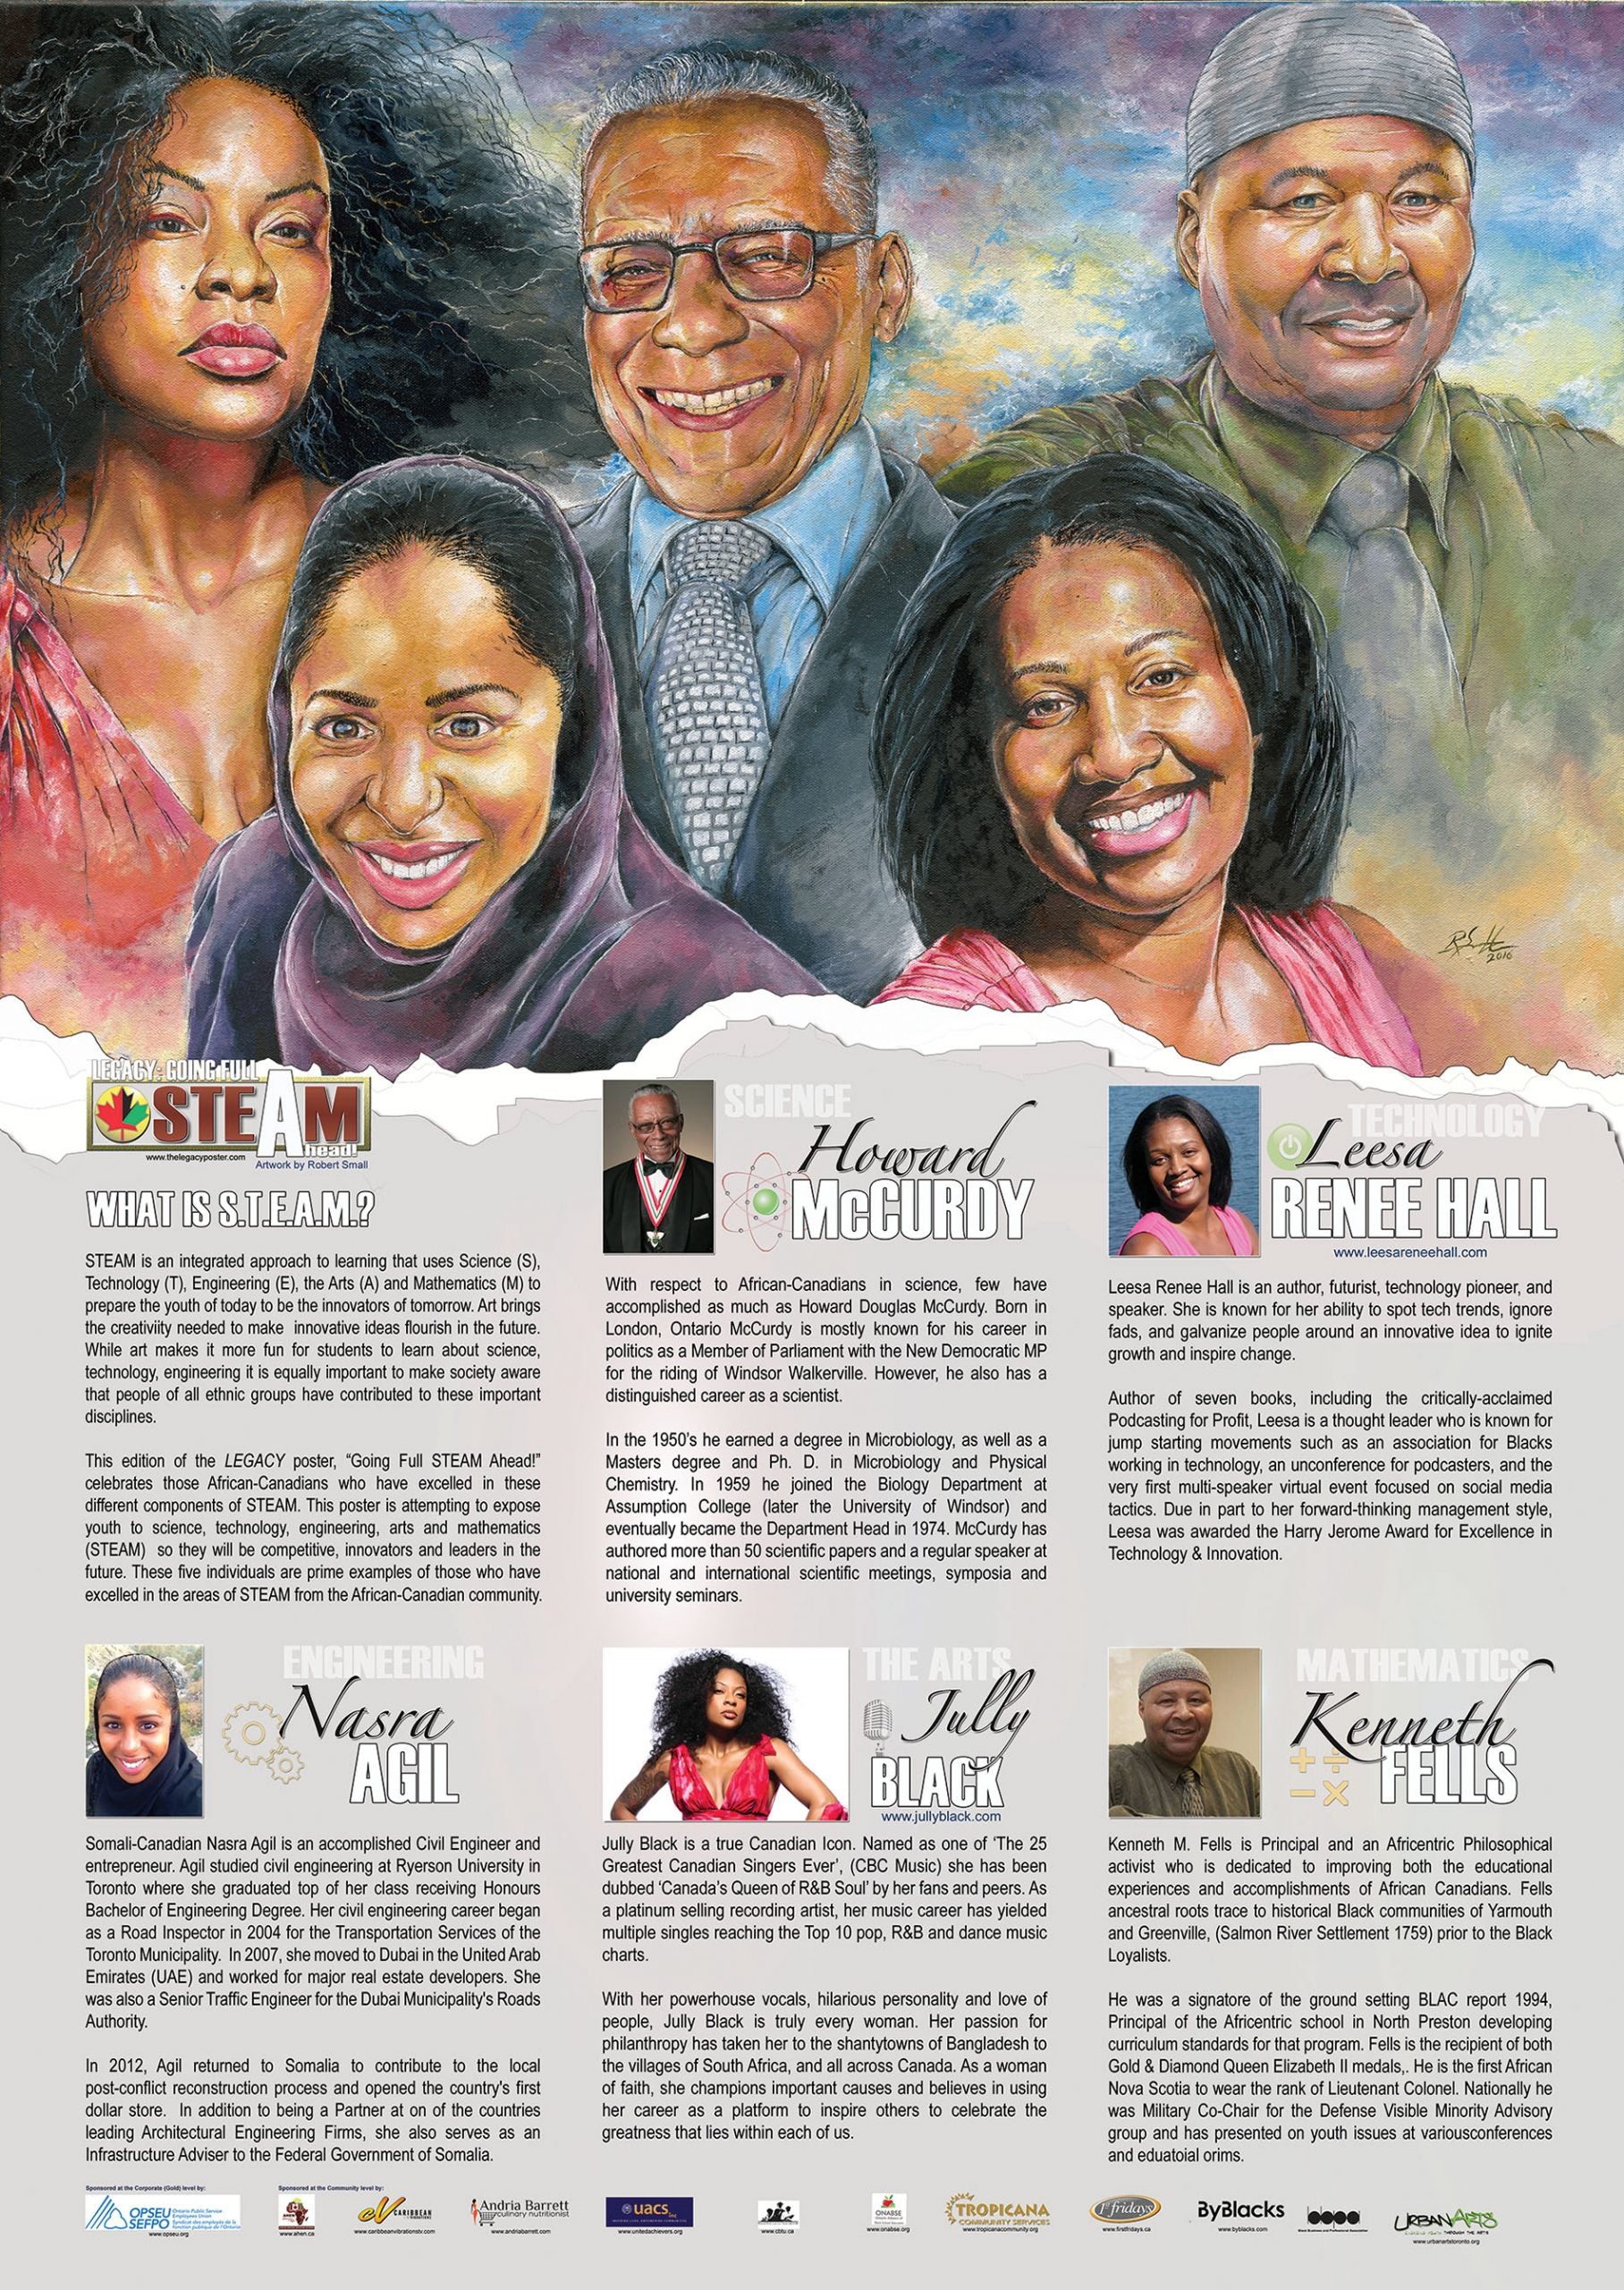 “An educational poster, ideal for Black History Month featuring scientist/politician Howard McCurdy, Leesa Renee Hall (Technology), engineer Nasri Agil , artist/singer Jully Black and educator Kenneth Fells created by African-Canadian artist Robert Small.”